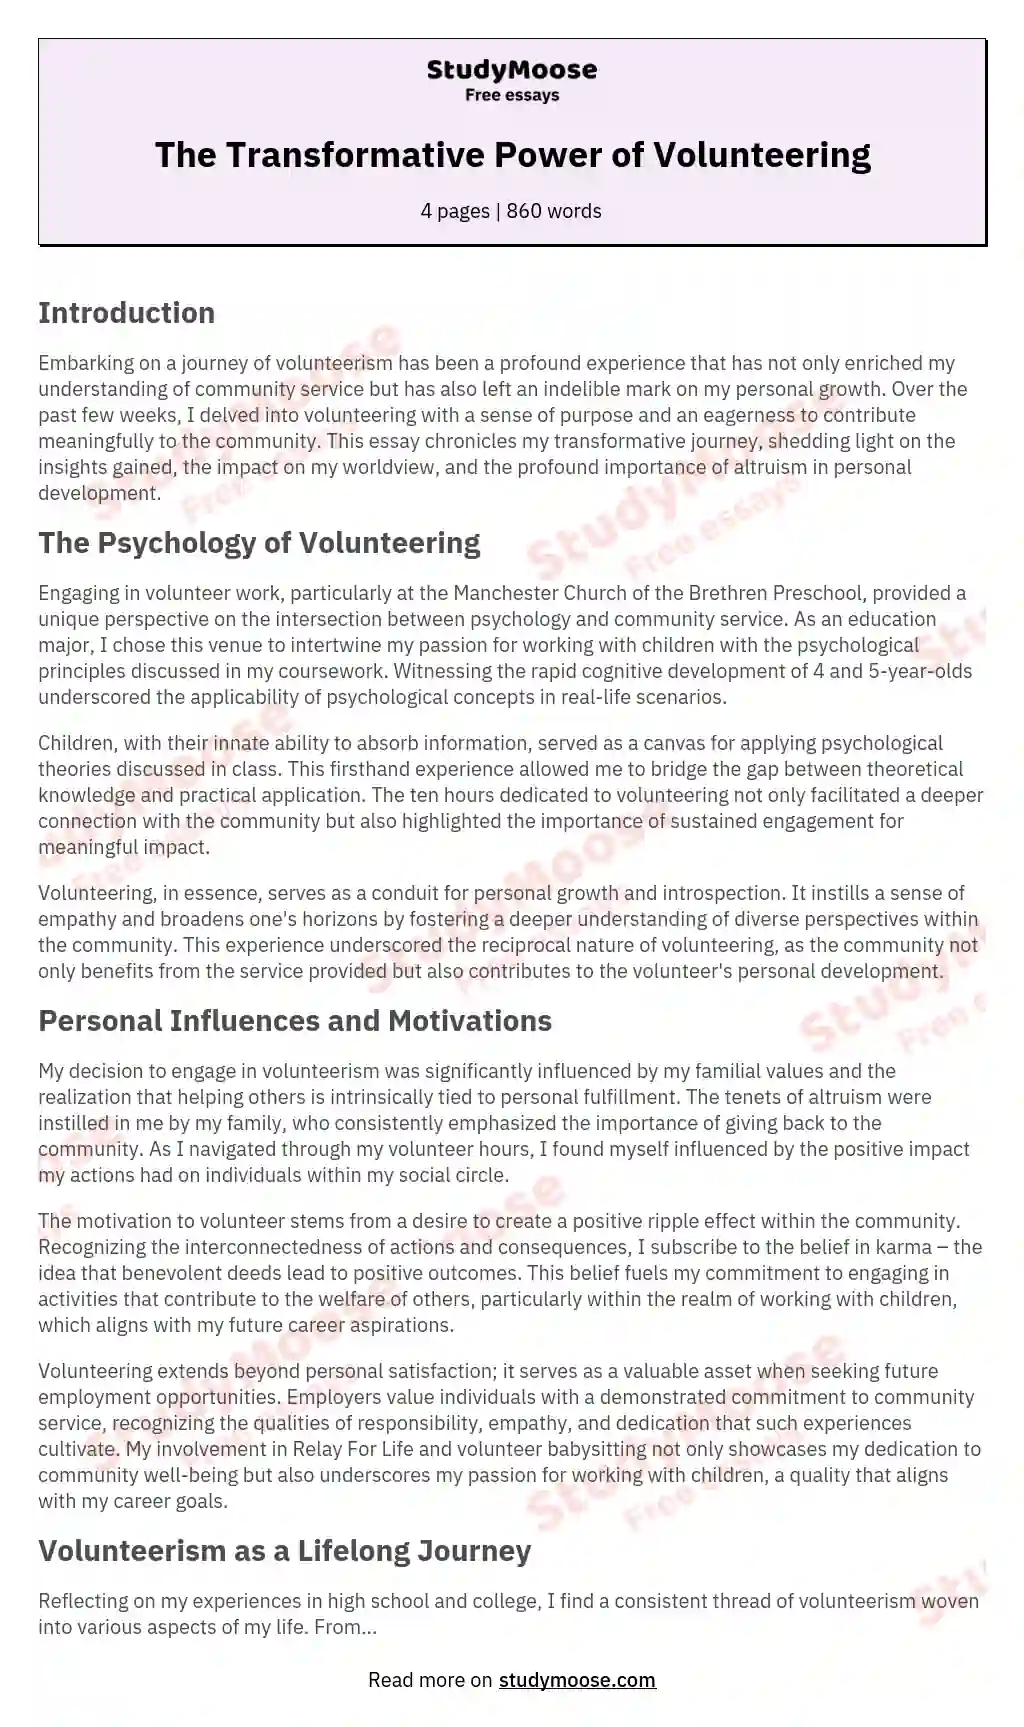 Final Reflection Paper on Volunteering